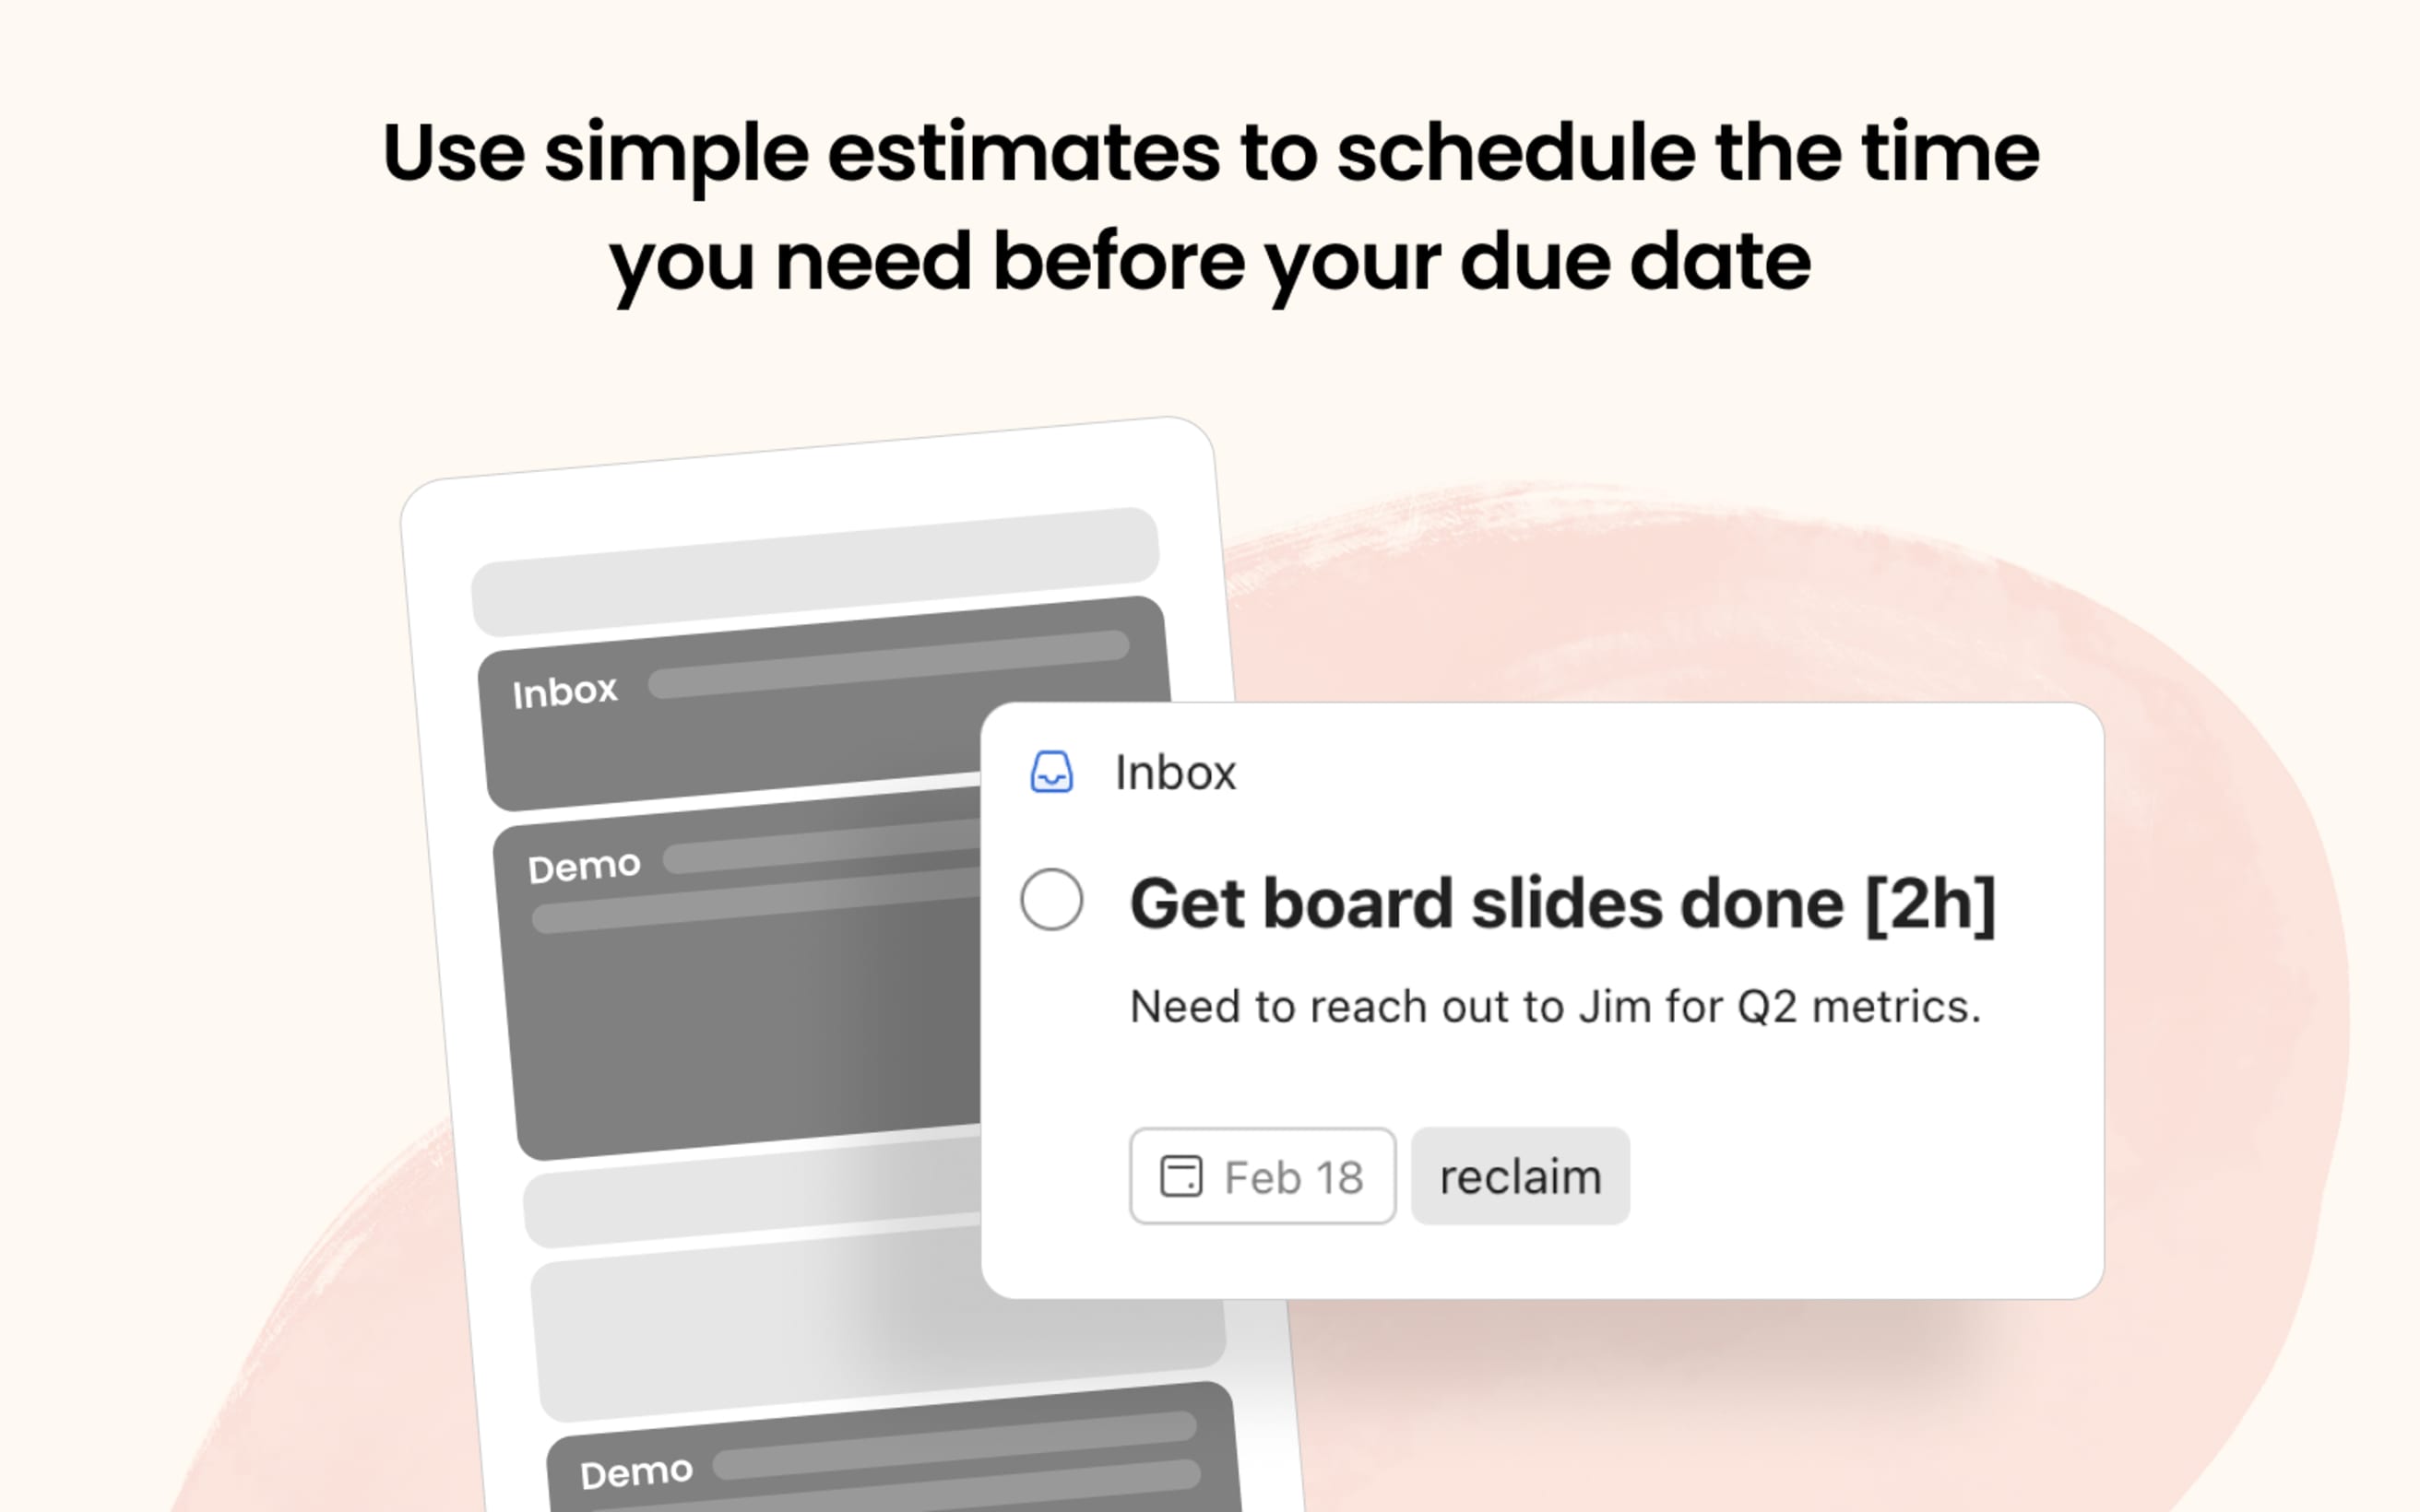 Use simple estimates to schedule the time you need before your due date.